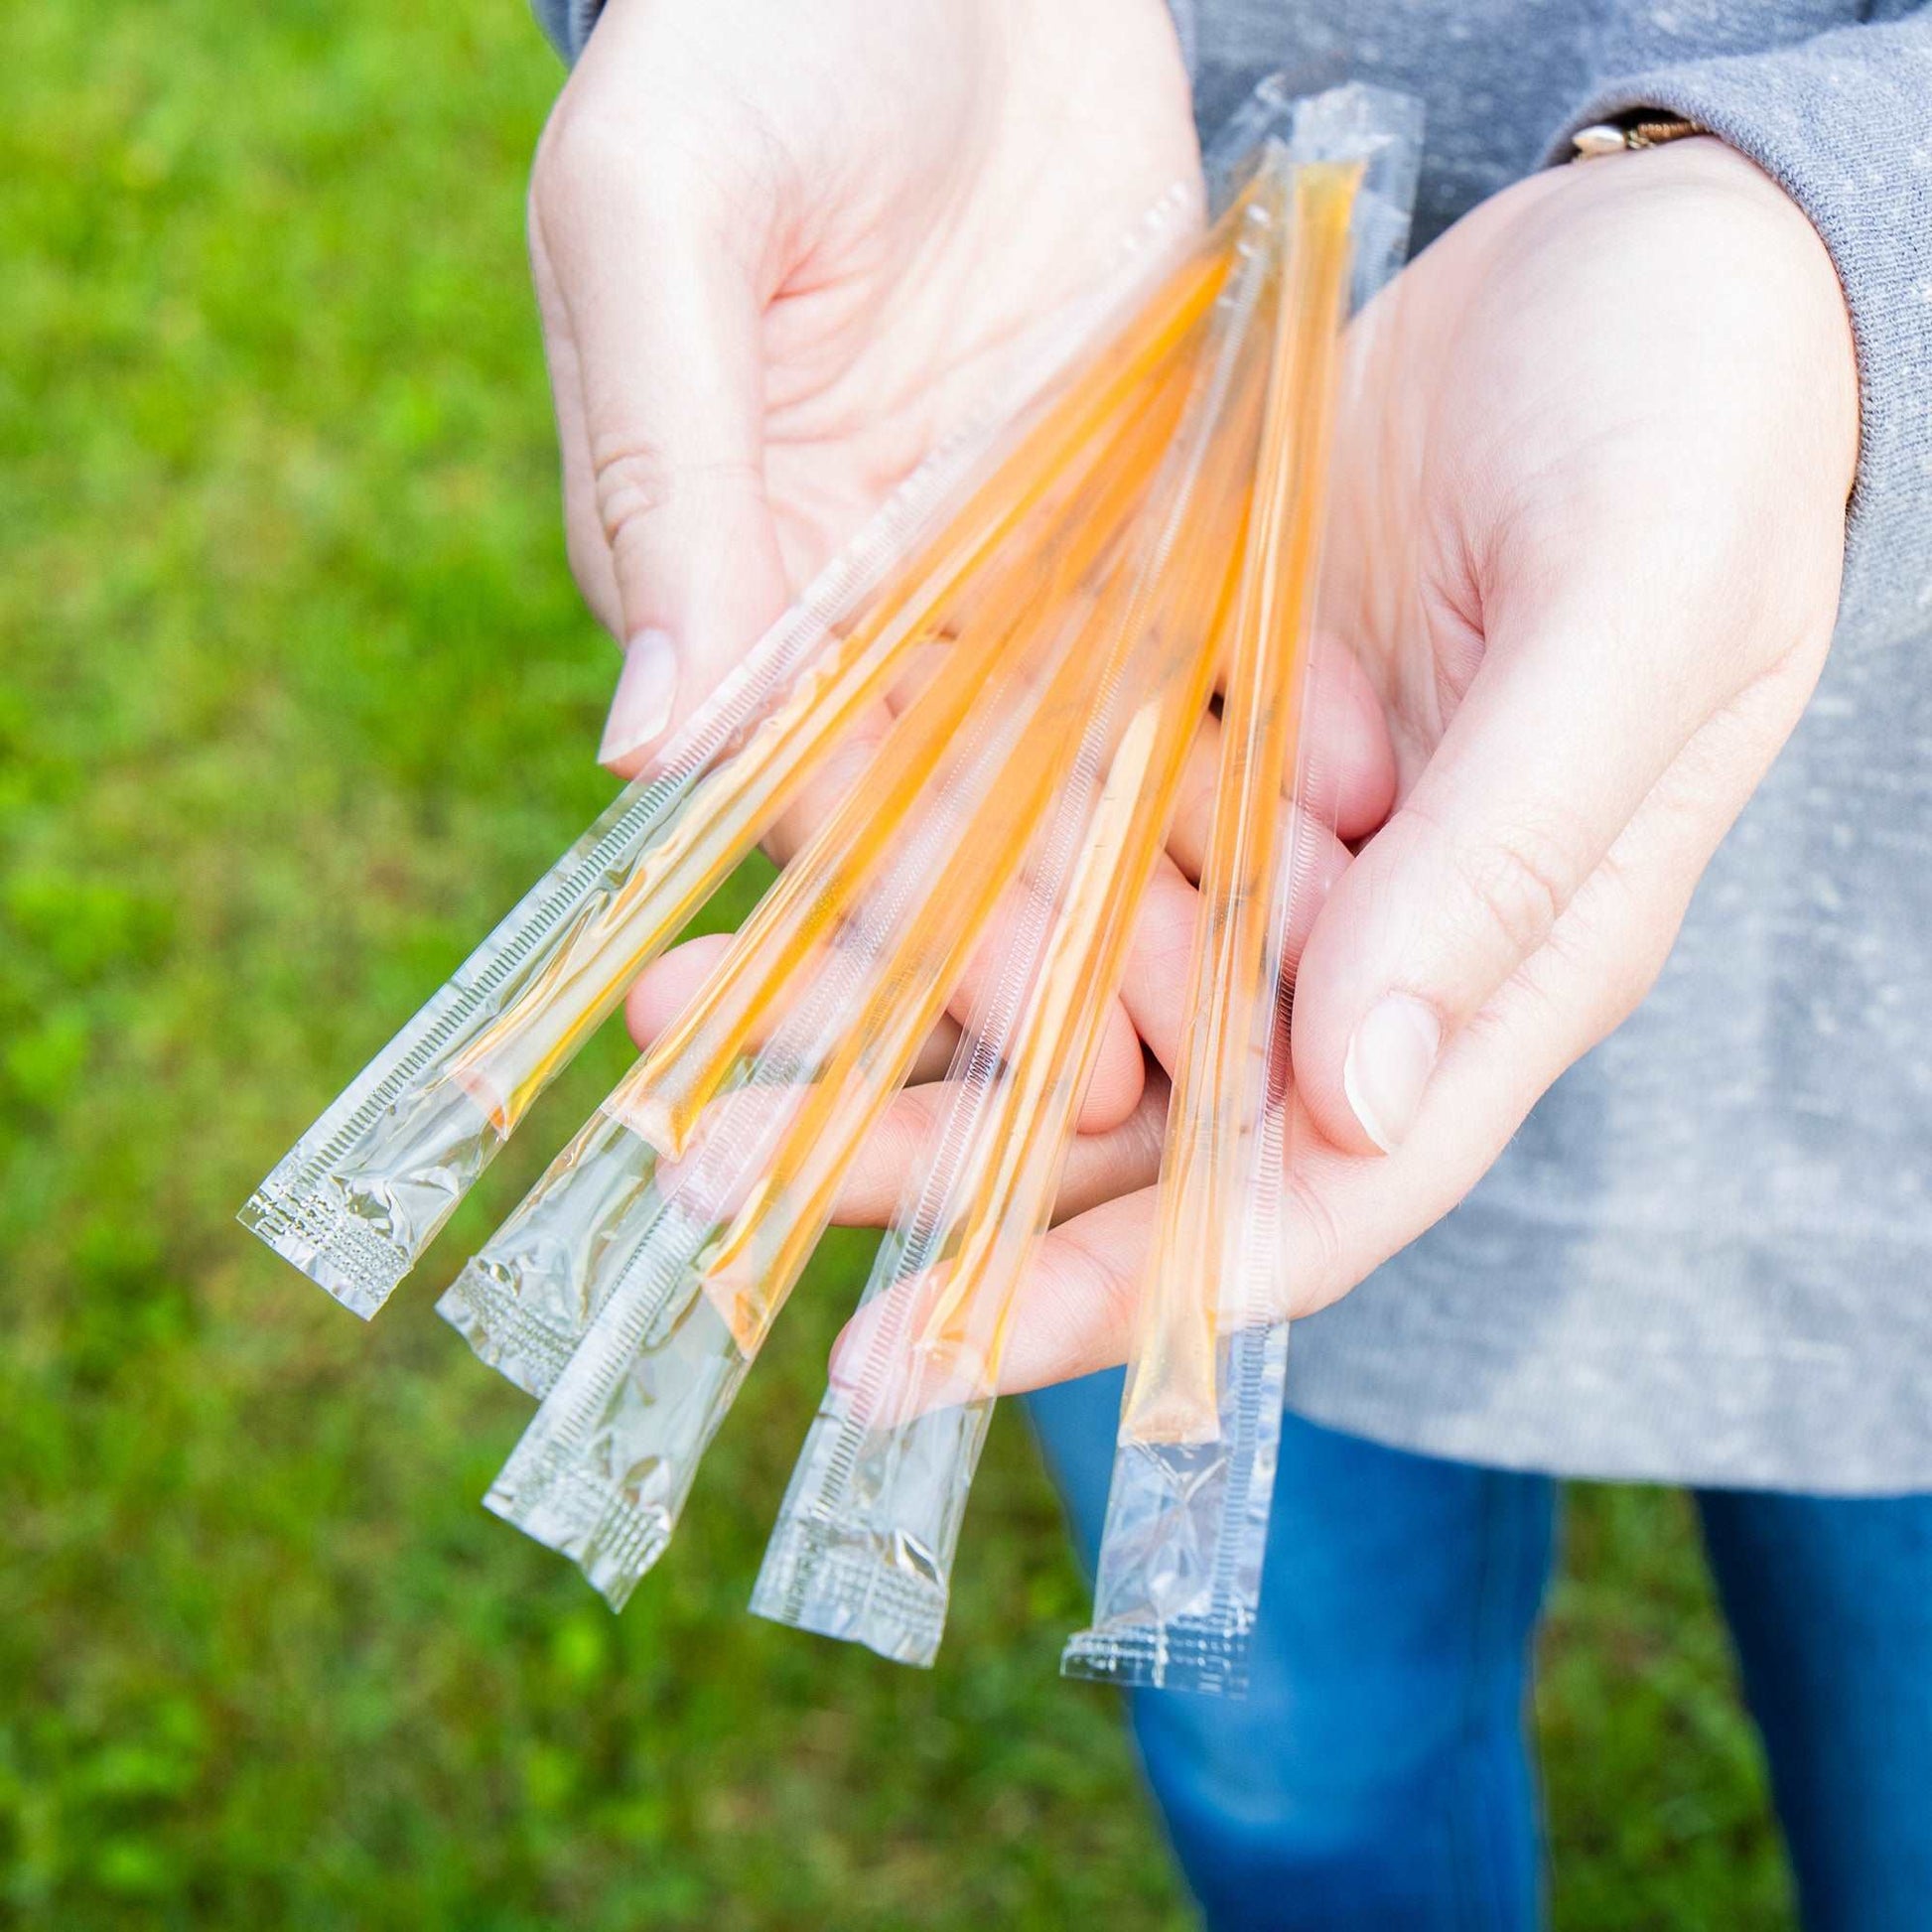 Five individually-wrapped honey sticks from Kallas Honey Farms held in outstretched hands against a grassy green background